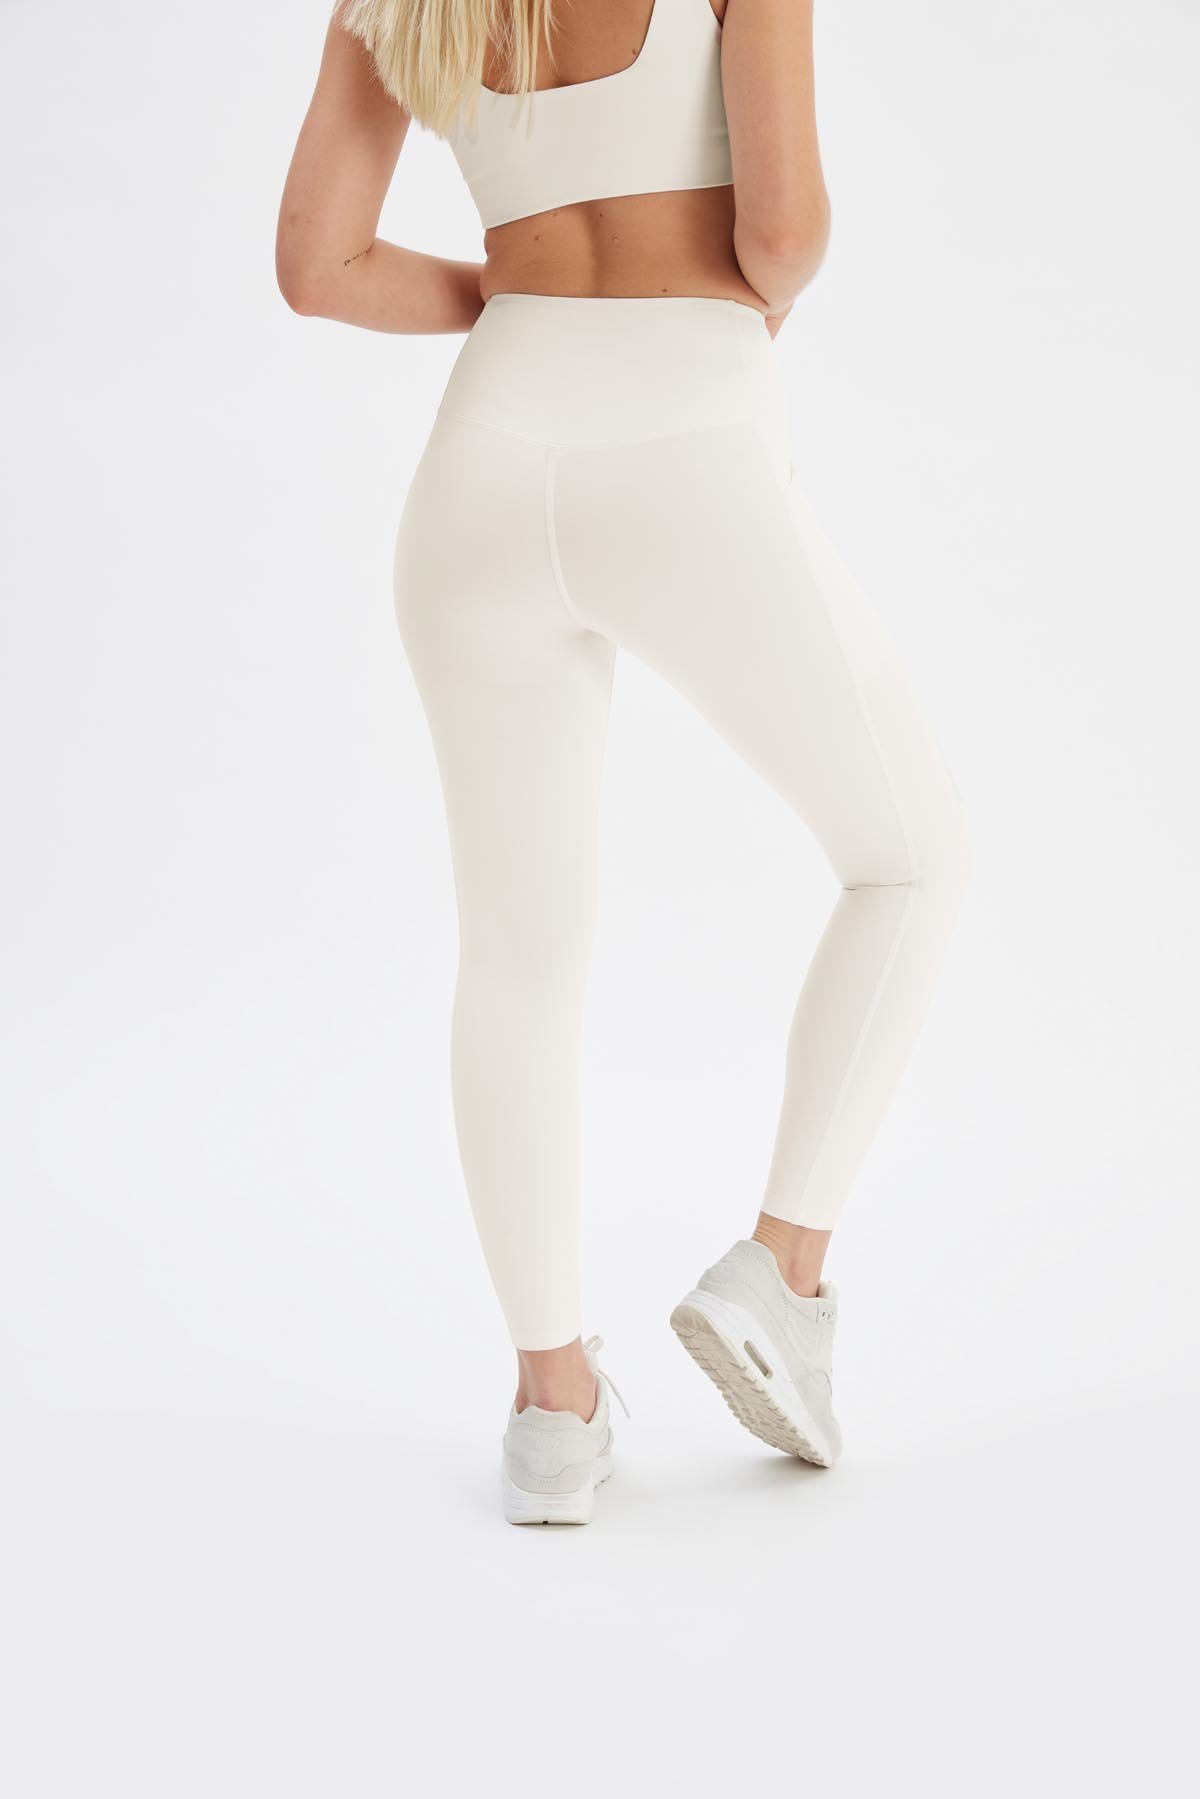 ⭐️ 2/$20 high Waisted Elevate Compression Leggings Tall